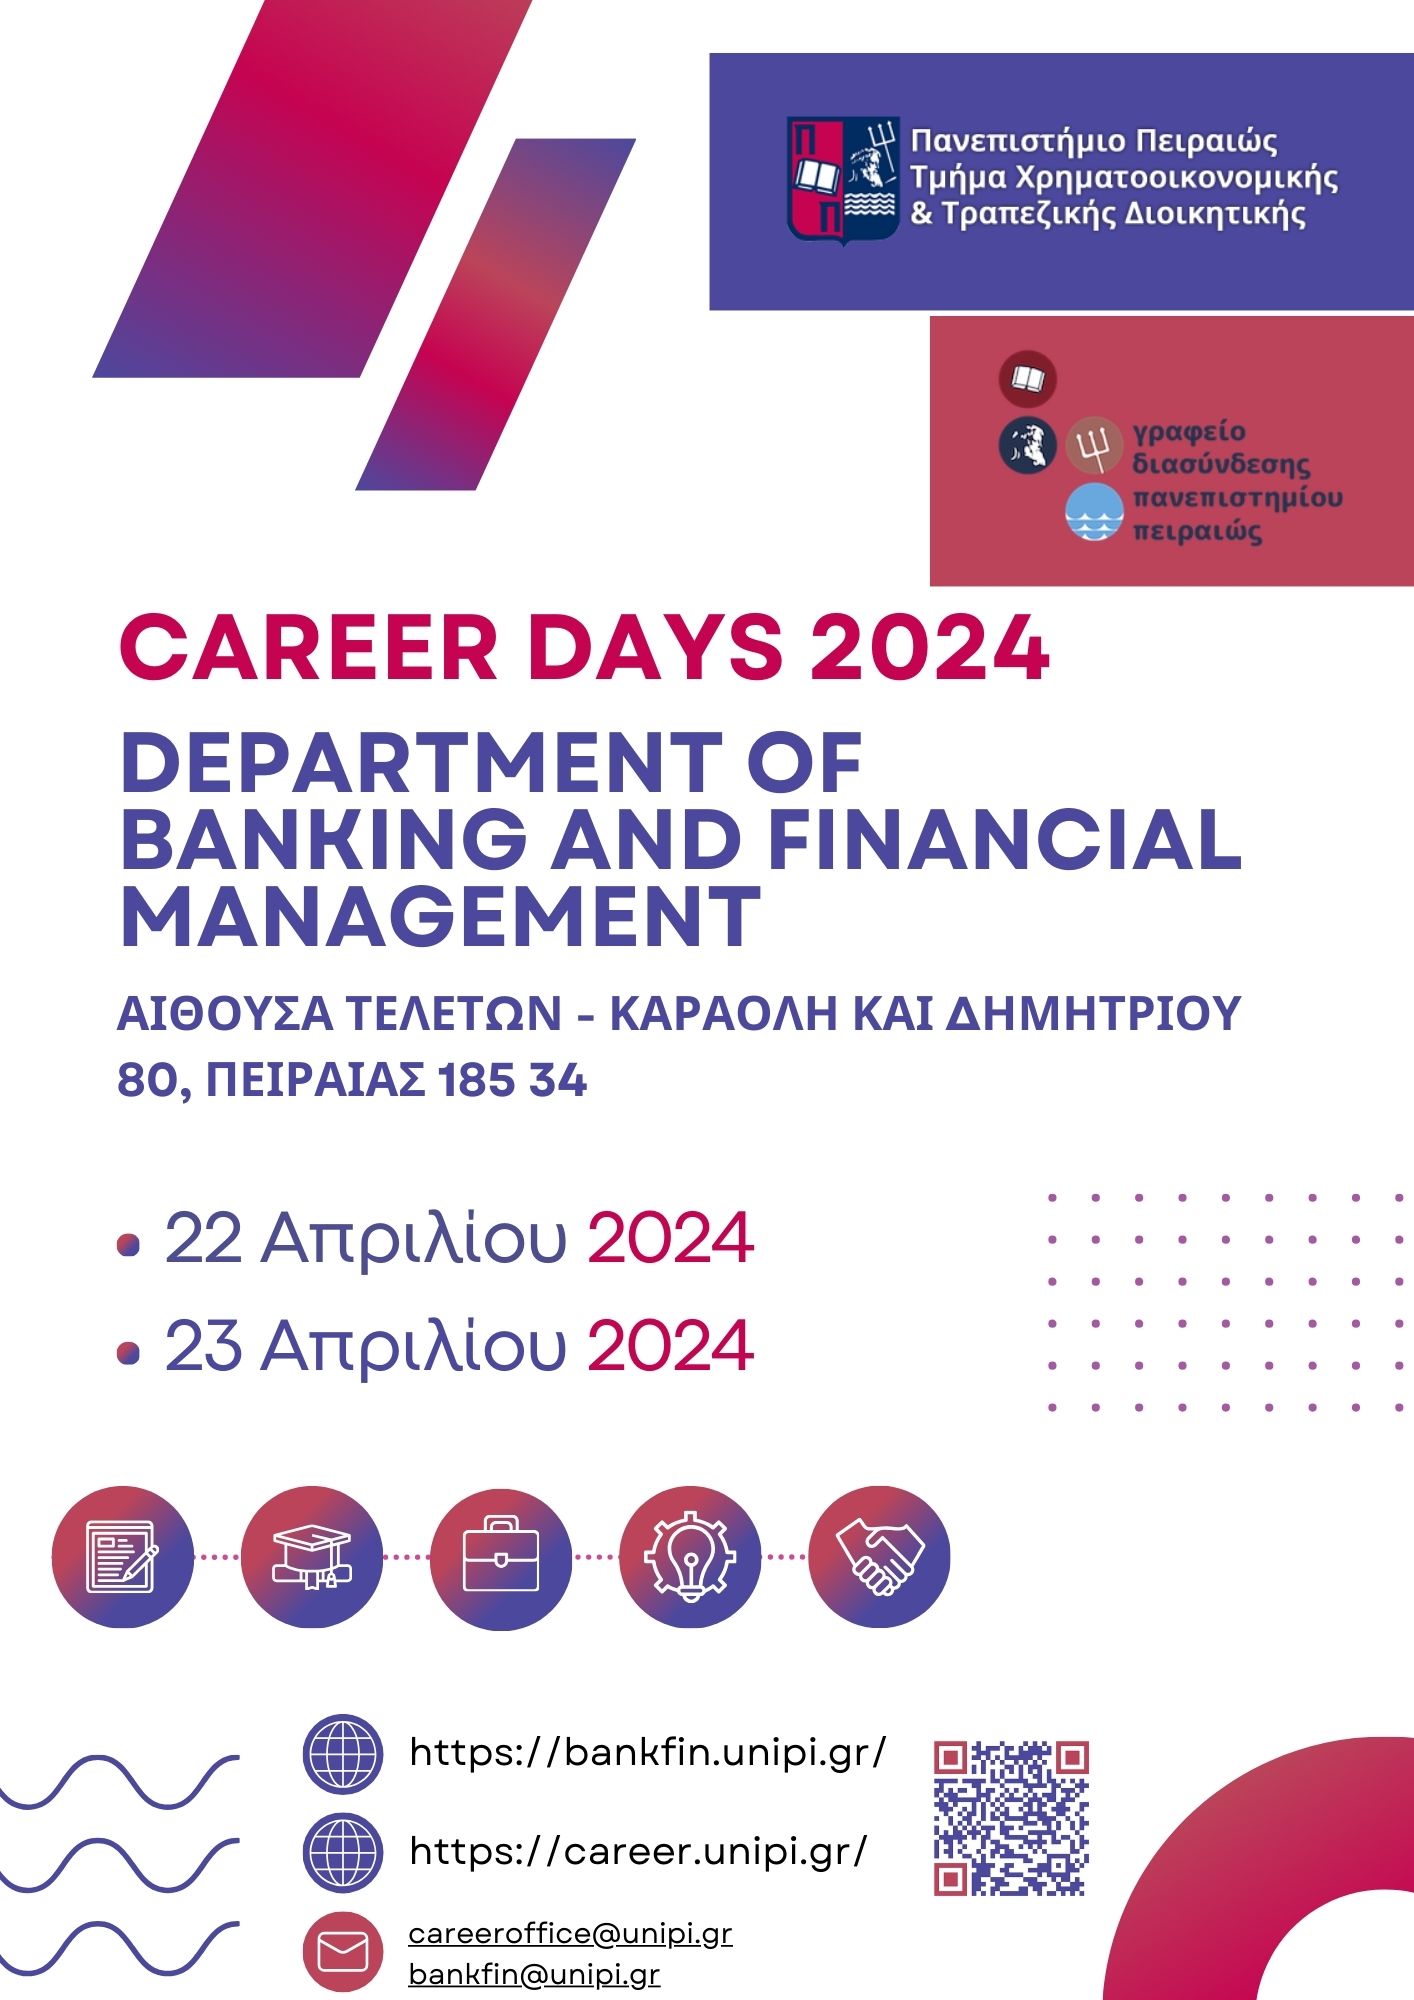 CAREER DAYS 2024 DEPARTMENT OF BANKING AND FINANCIAL MANAGEMENT